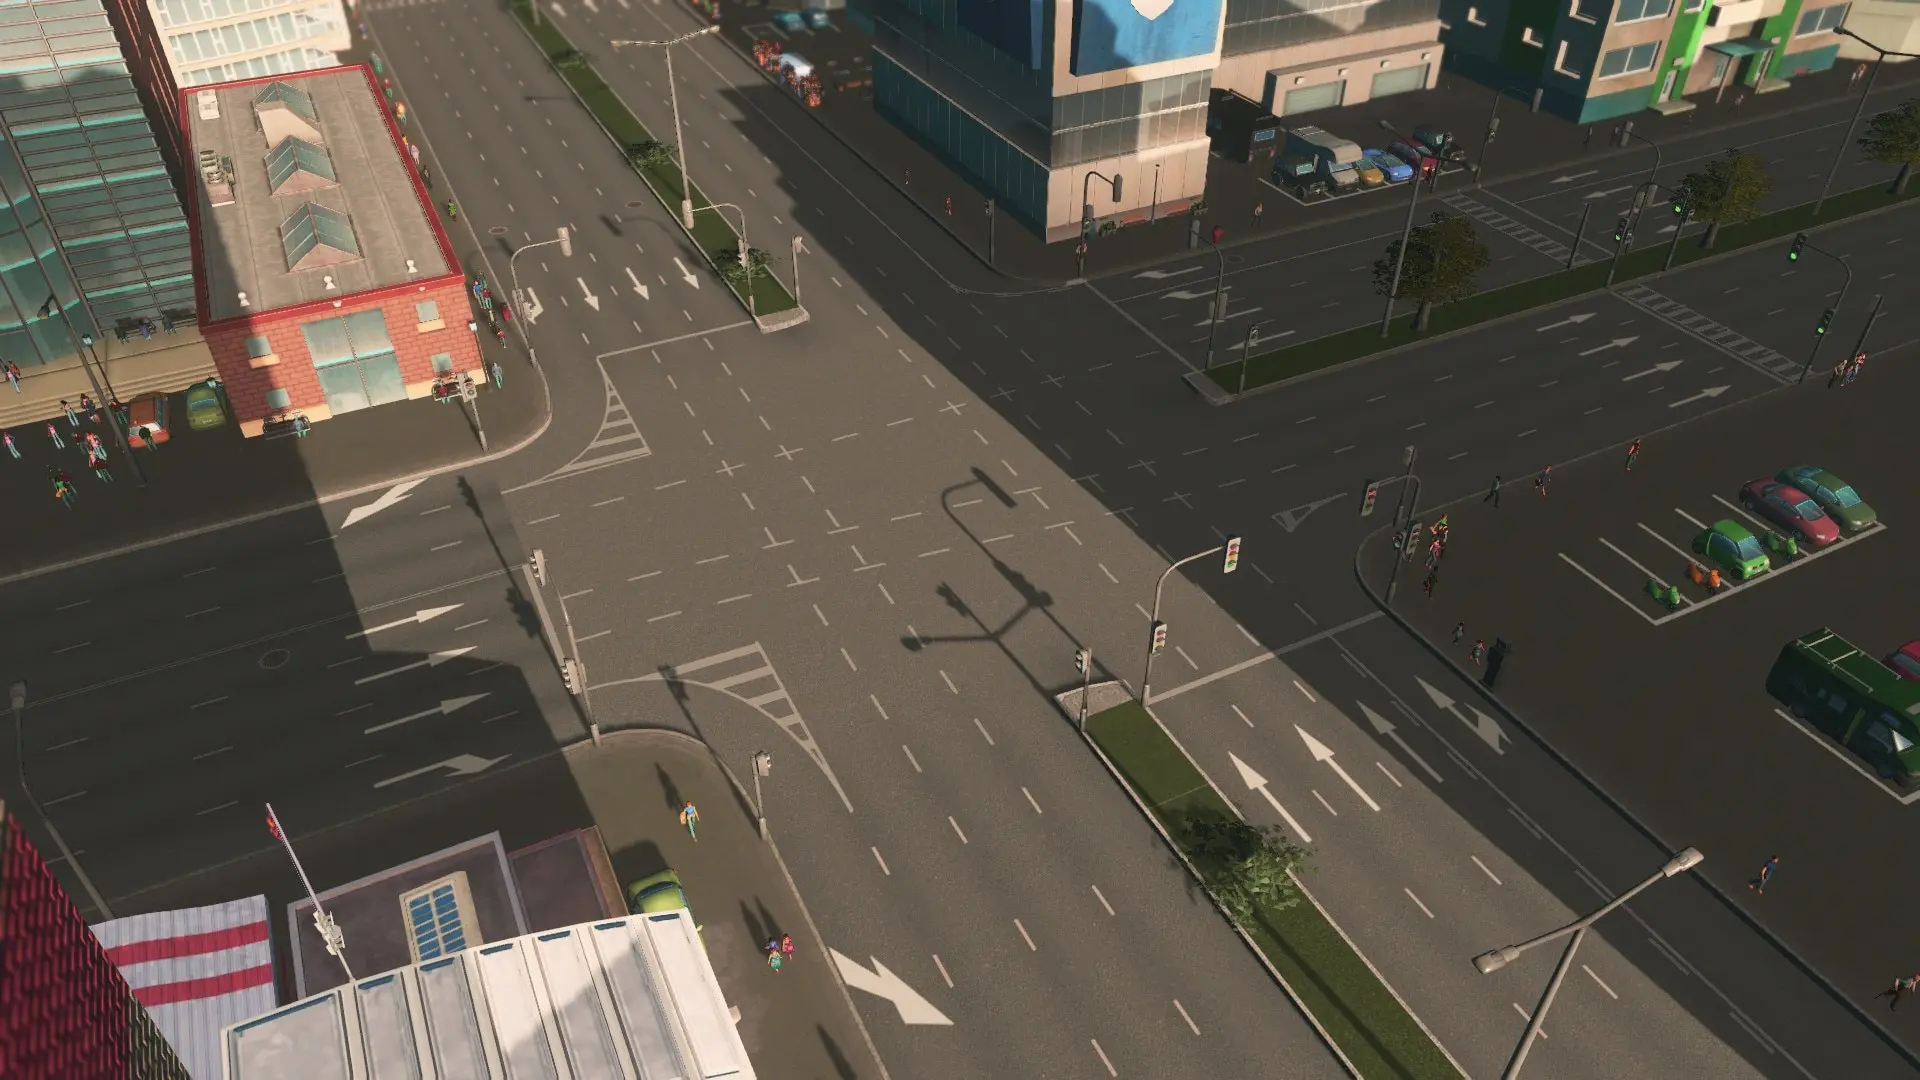 First intersection.